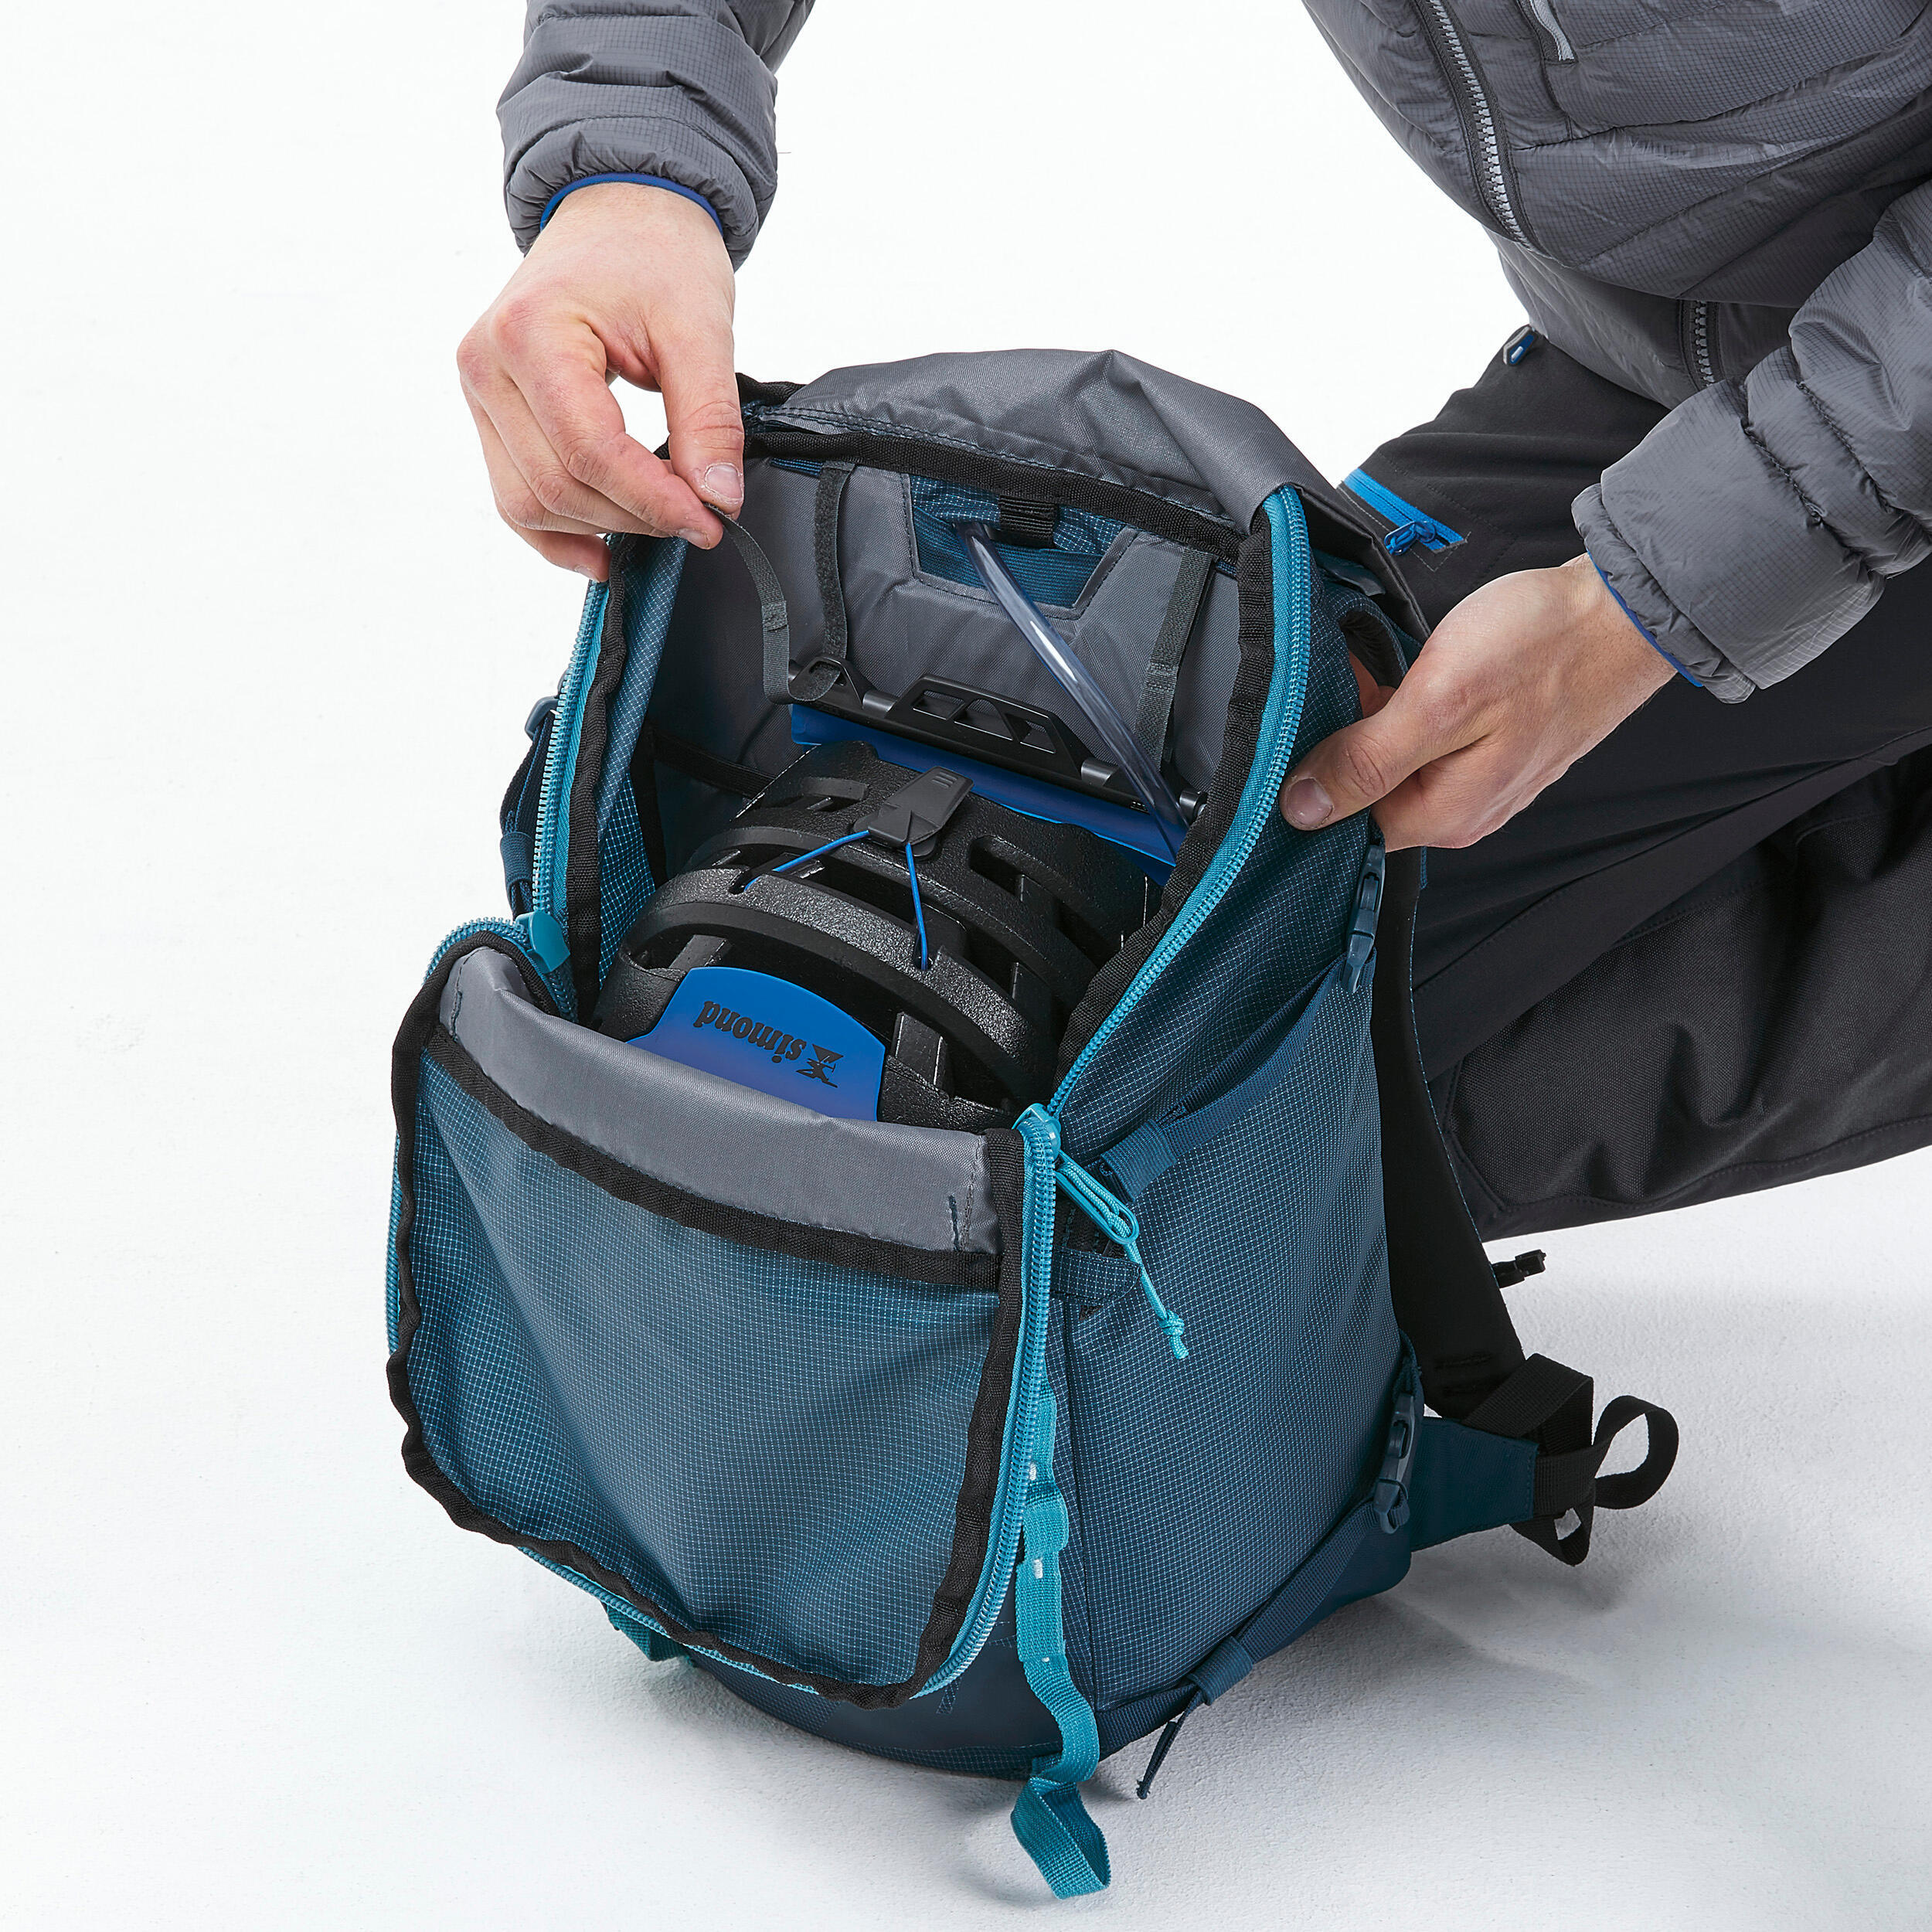 Mountaineering backpack 22 litres - MOUNTAINEERING 22 - GREEN BLUE 8/12